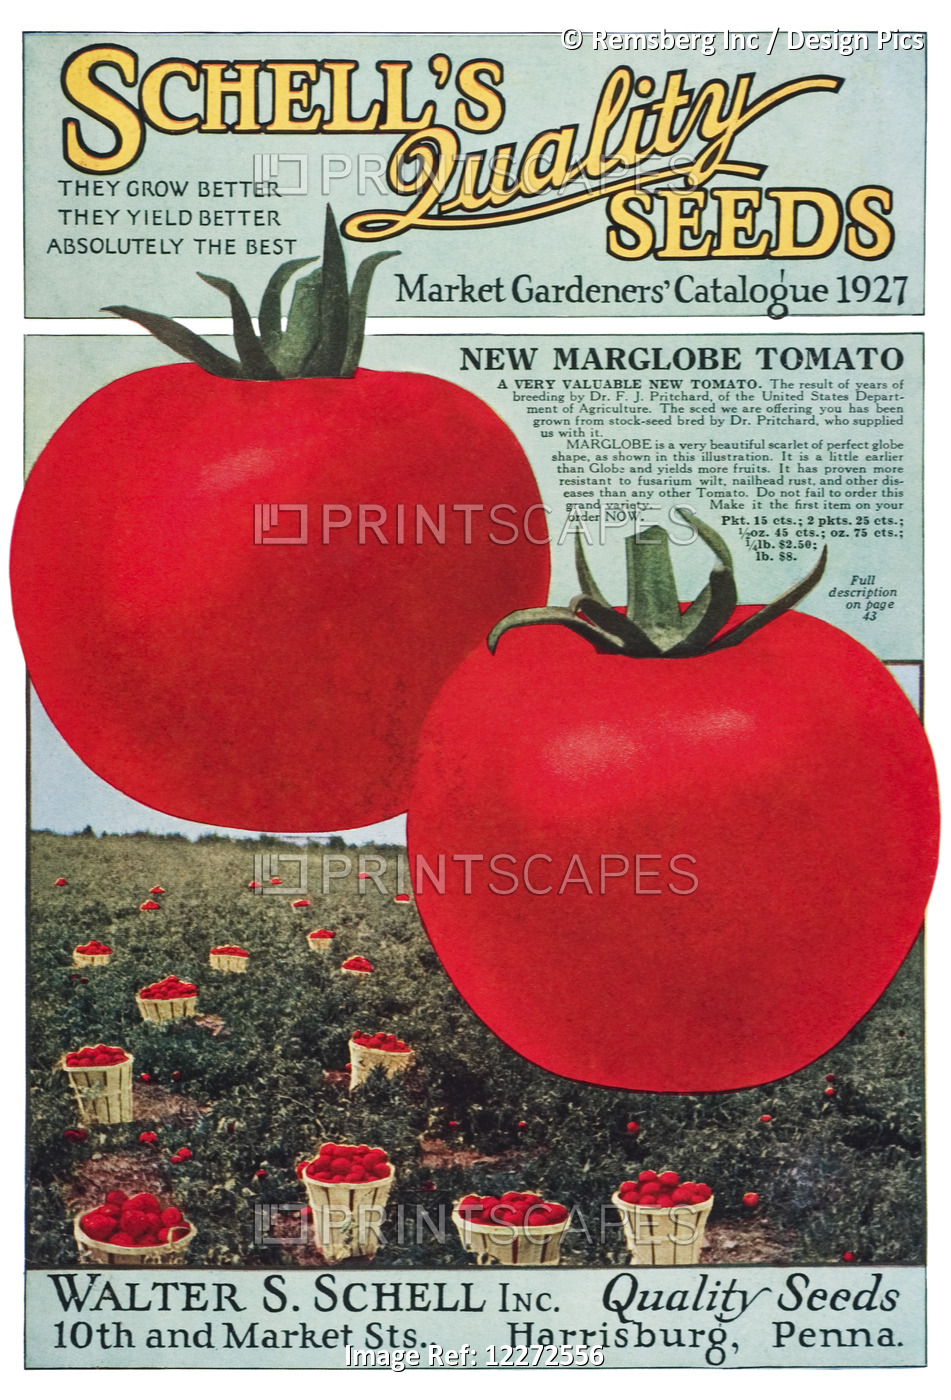 Historic Schell's Seed Catalog With Illustration Of Marglobe Tomato From 20th ...